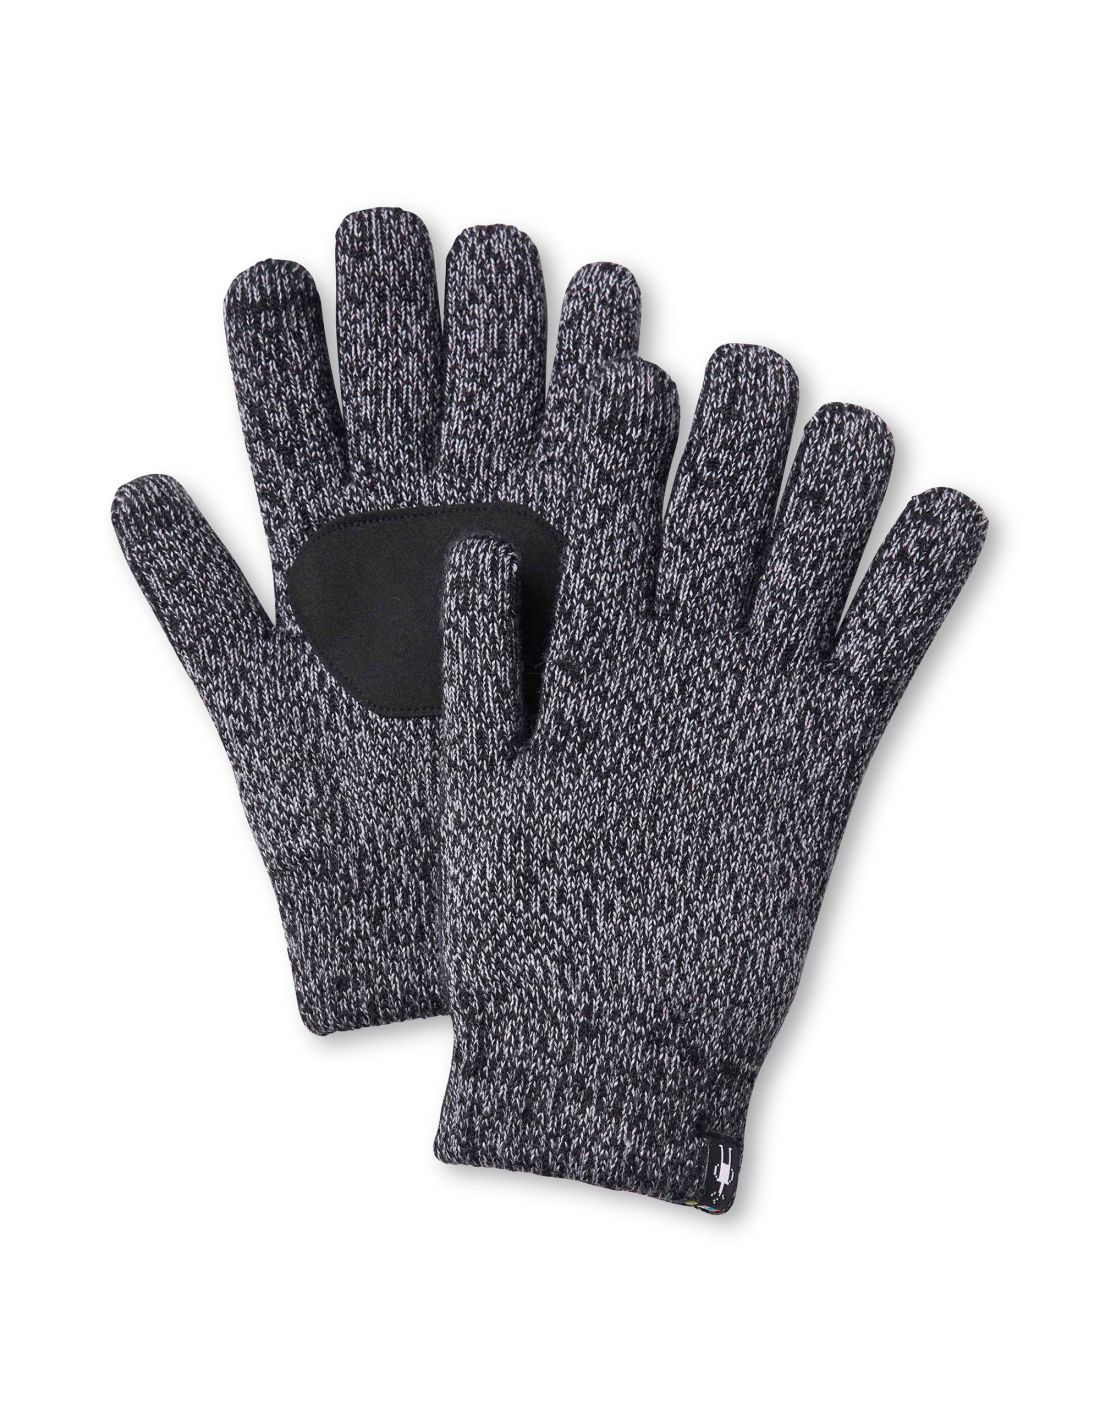 https://www.grand-froid.fr/13229-thickbox_default/gants-tactiles-hiver-cozy-grip-smartwool.jpg